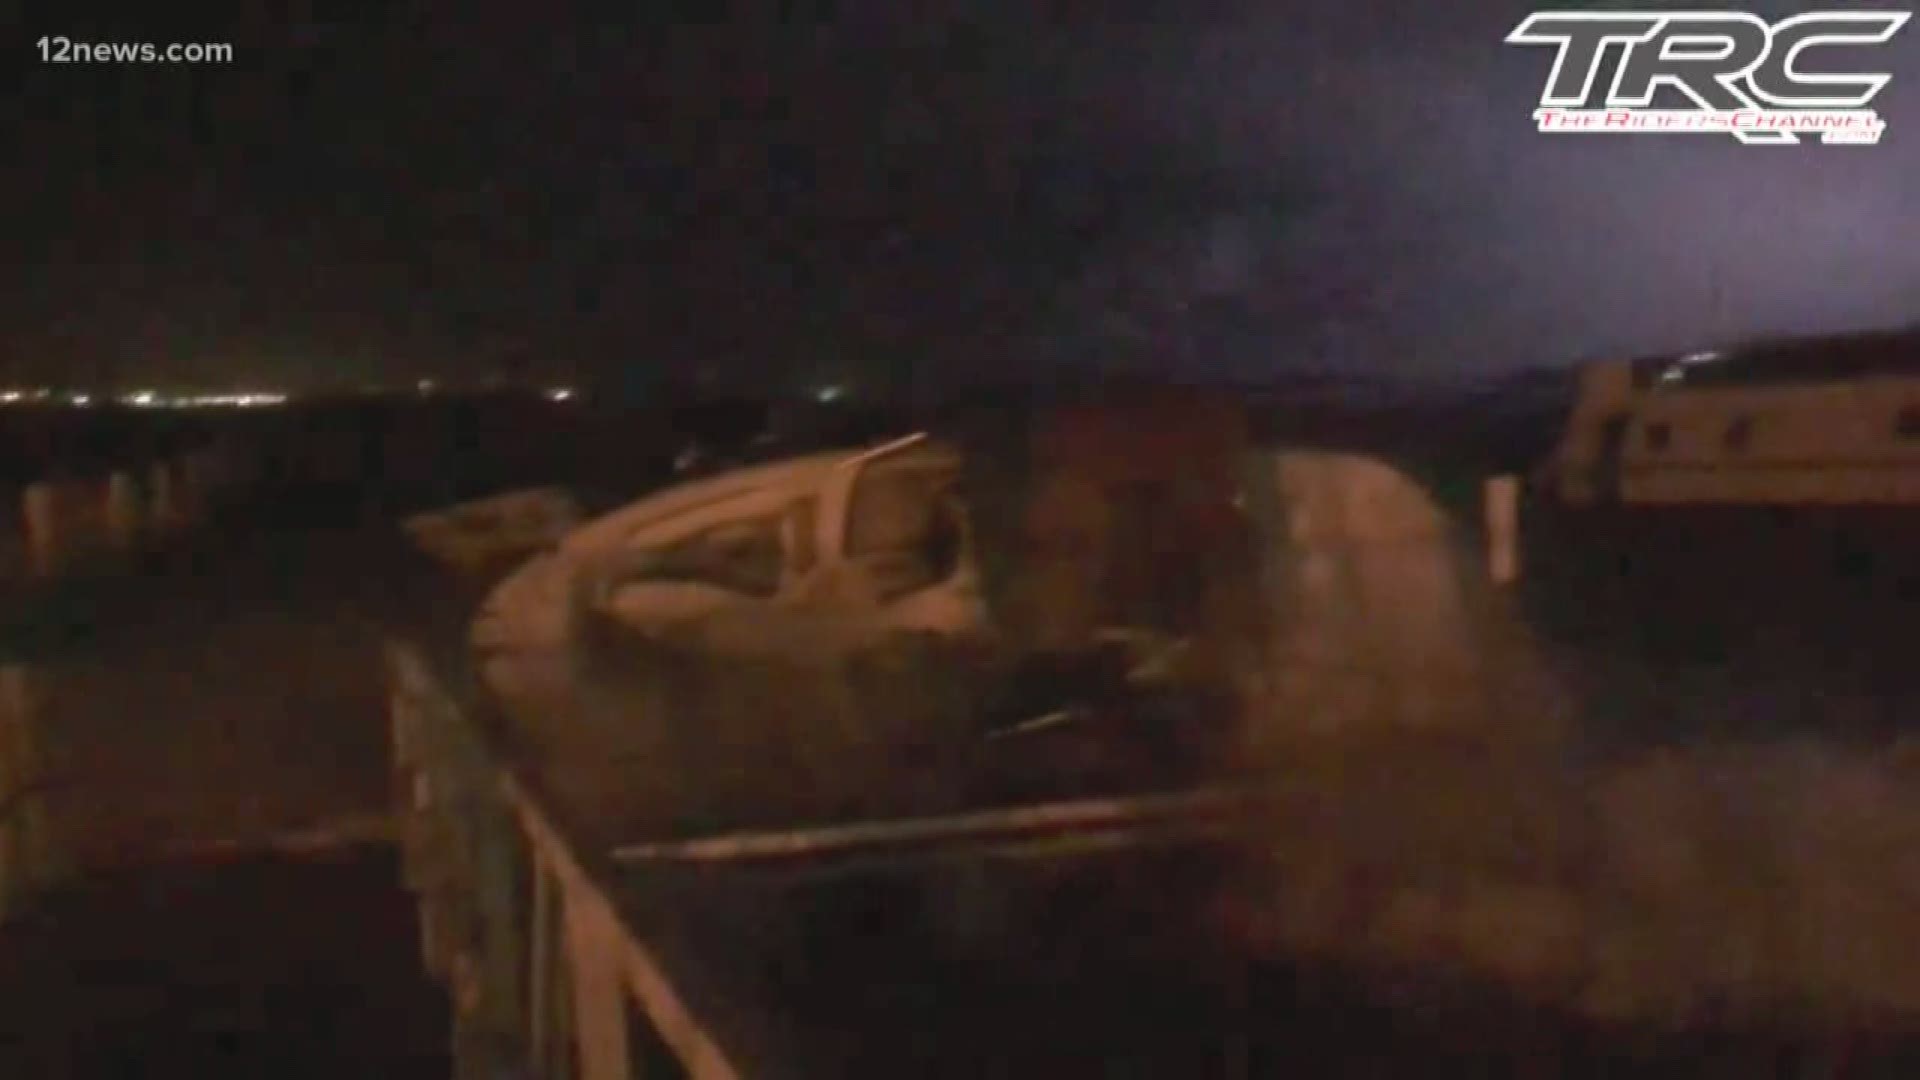 Video shows a monsoon storm so rough, several boats sank at Lake Havasu, the Mohave County Sheriff's Office says.